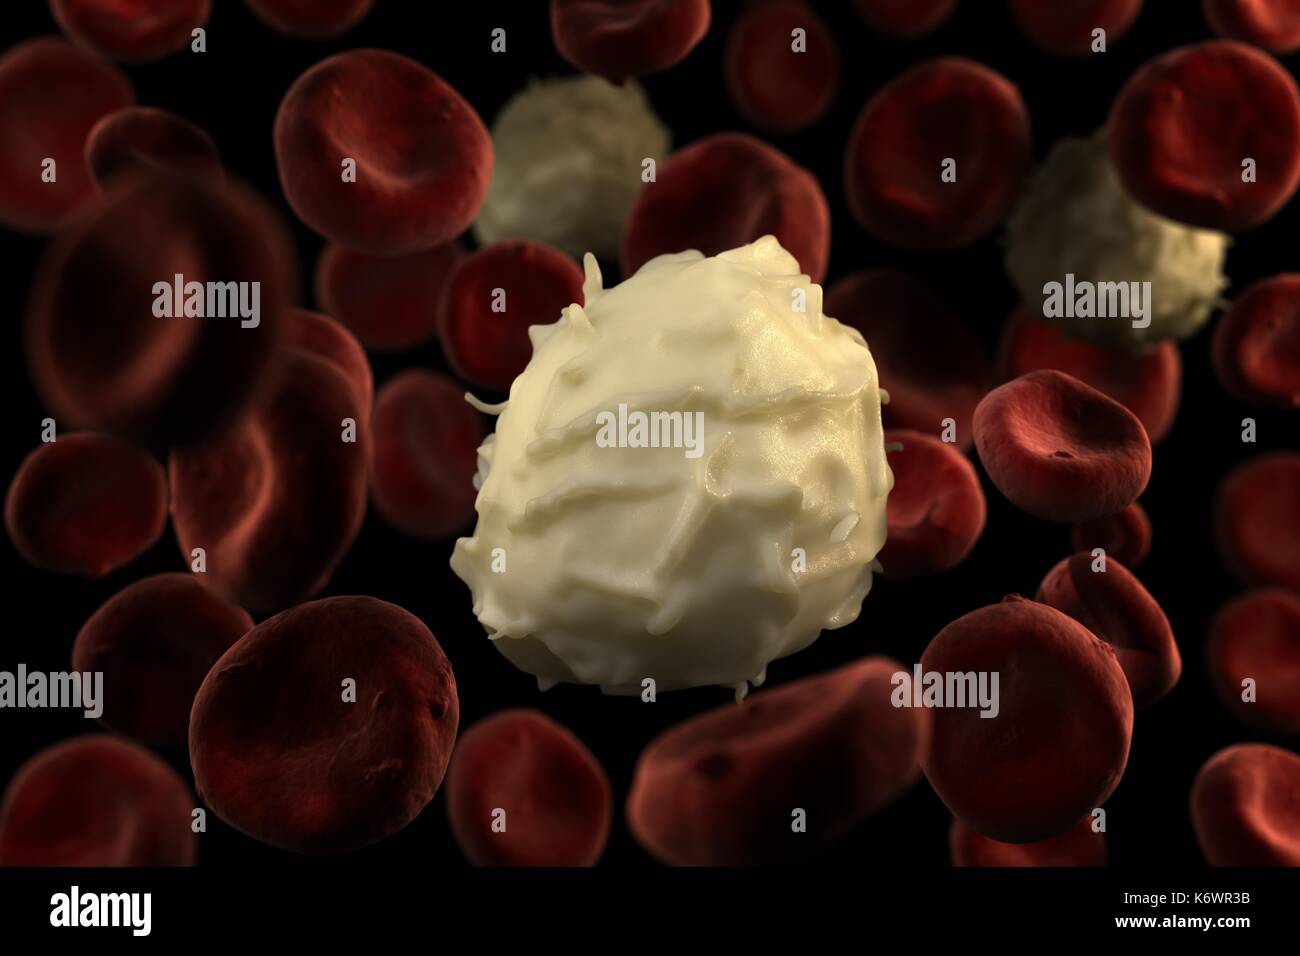 Highly detailed close-up of specialized white blood cell (basophil) flowing in blood stream against black background. Stock Photo